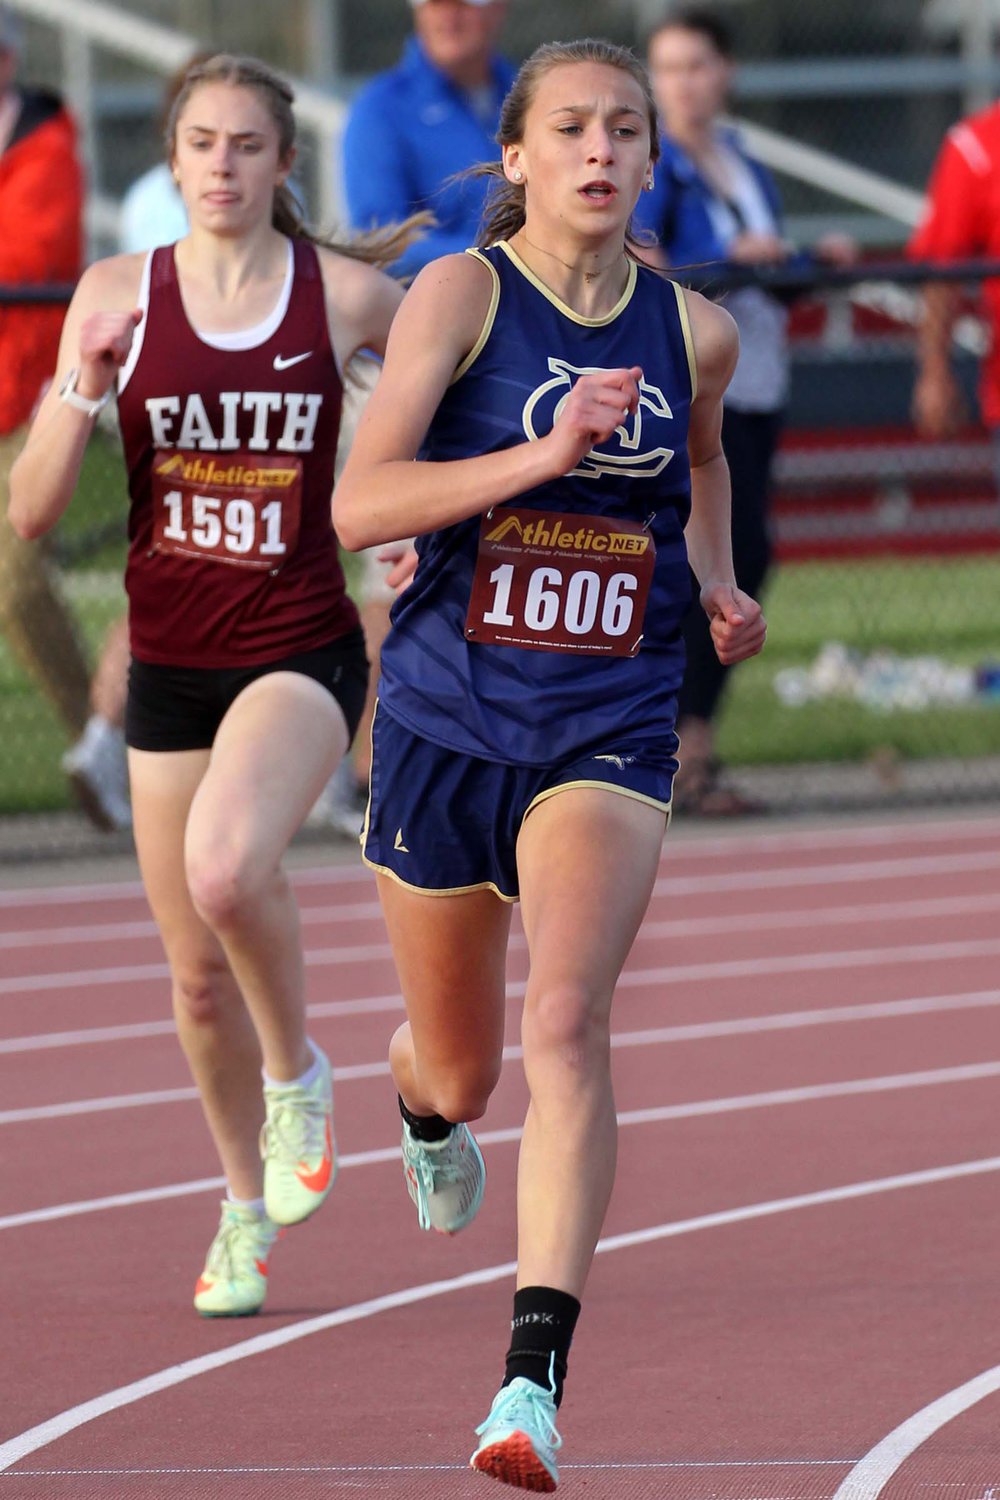 Brailey Hoagland of Fountain Central was the first female runner at her school to run a sub-minute 400m as she took ninth at the Lafayette Jefferson track regional with a time of 59.98, breaking her own school record set earlier this year of 1:01.79.